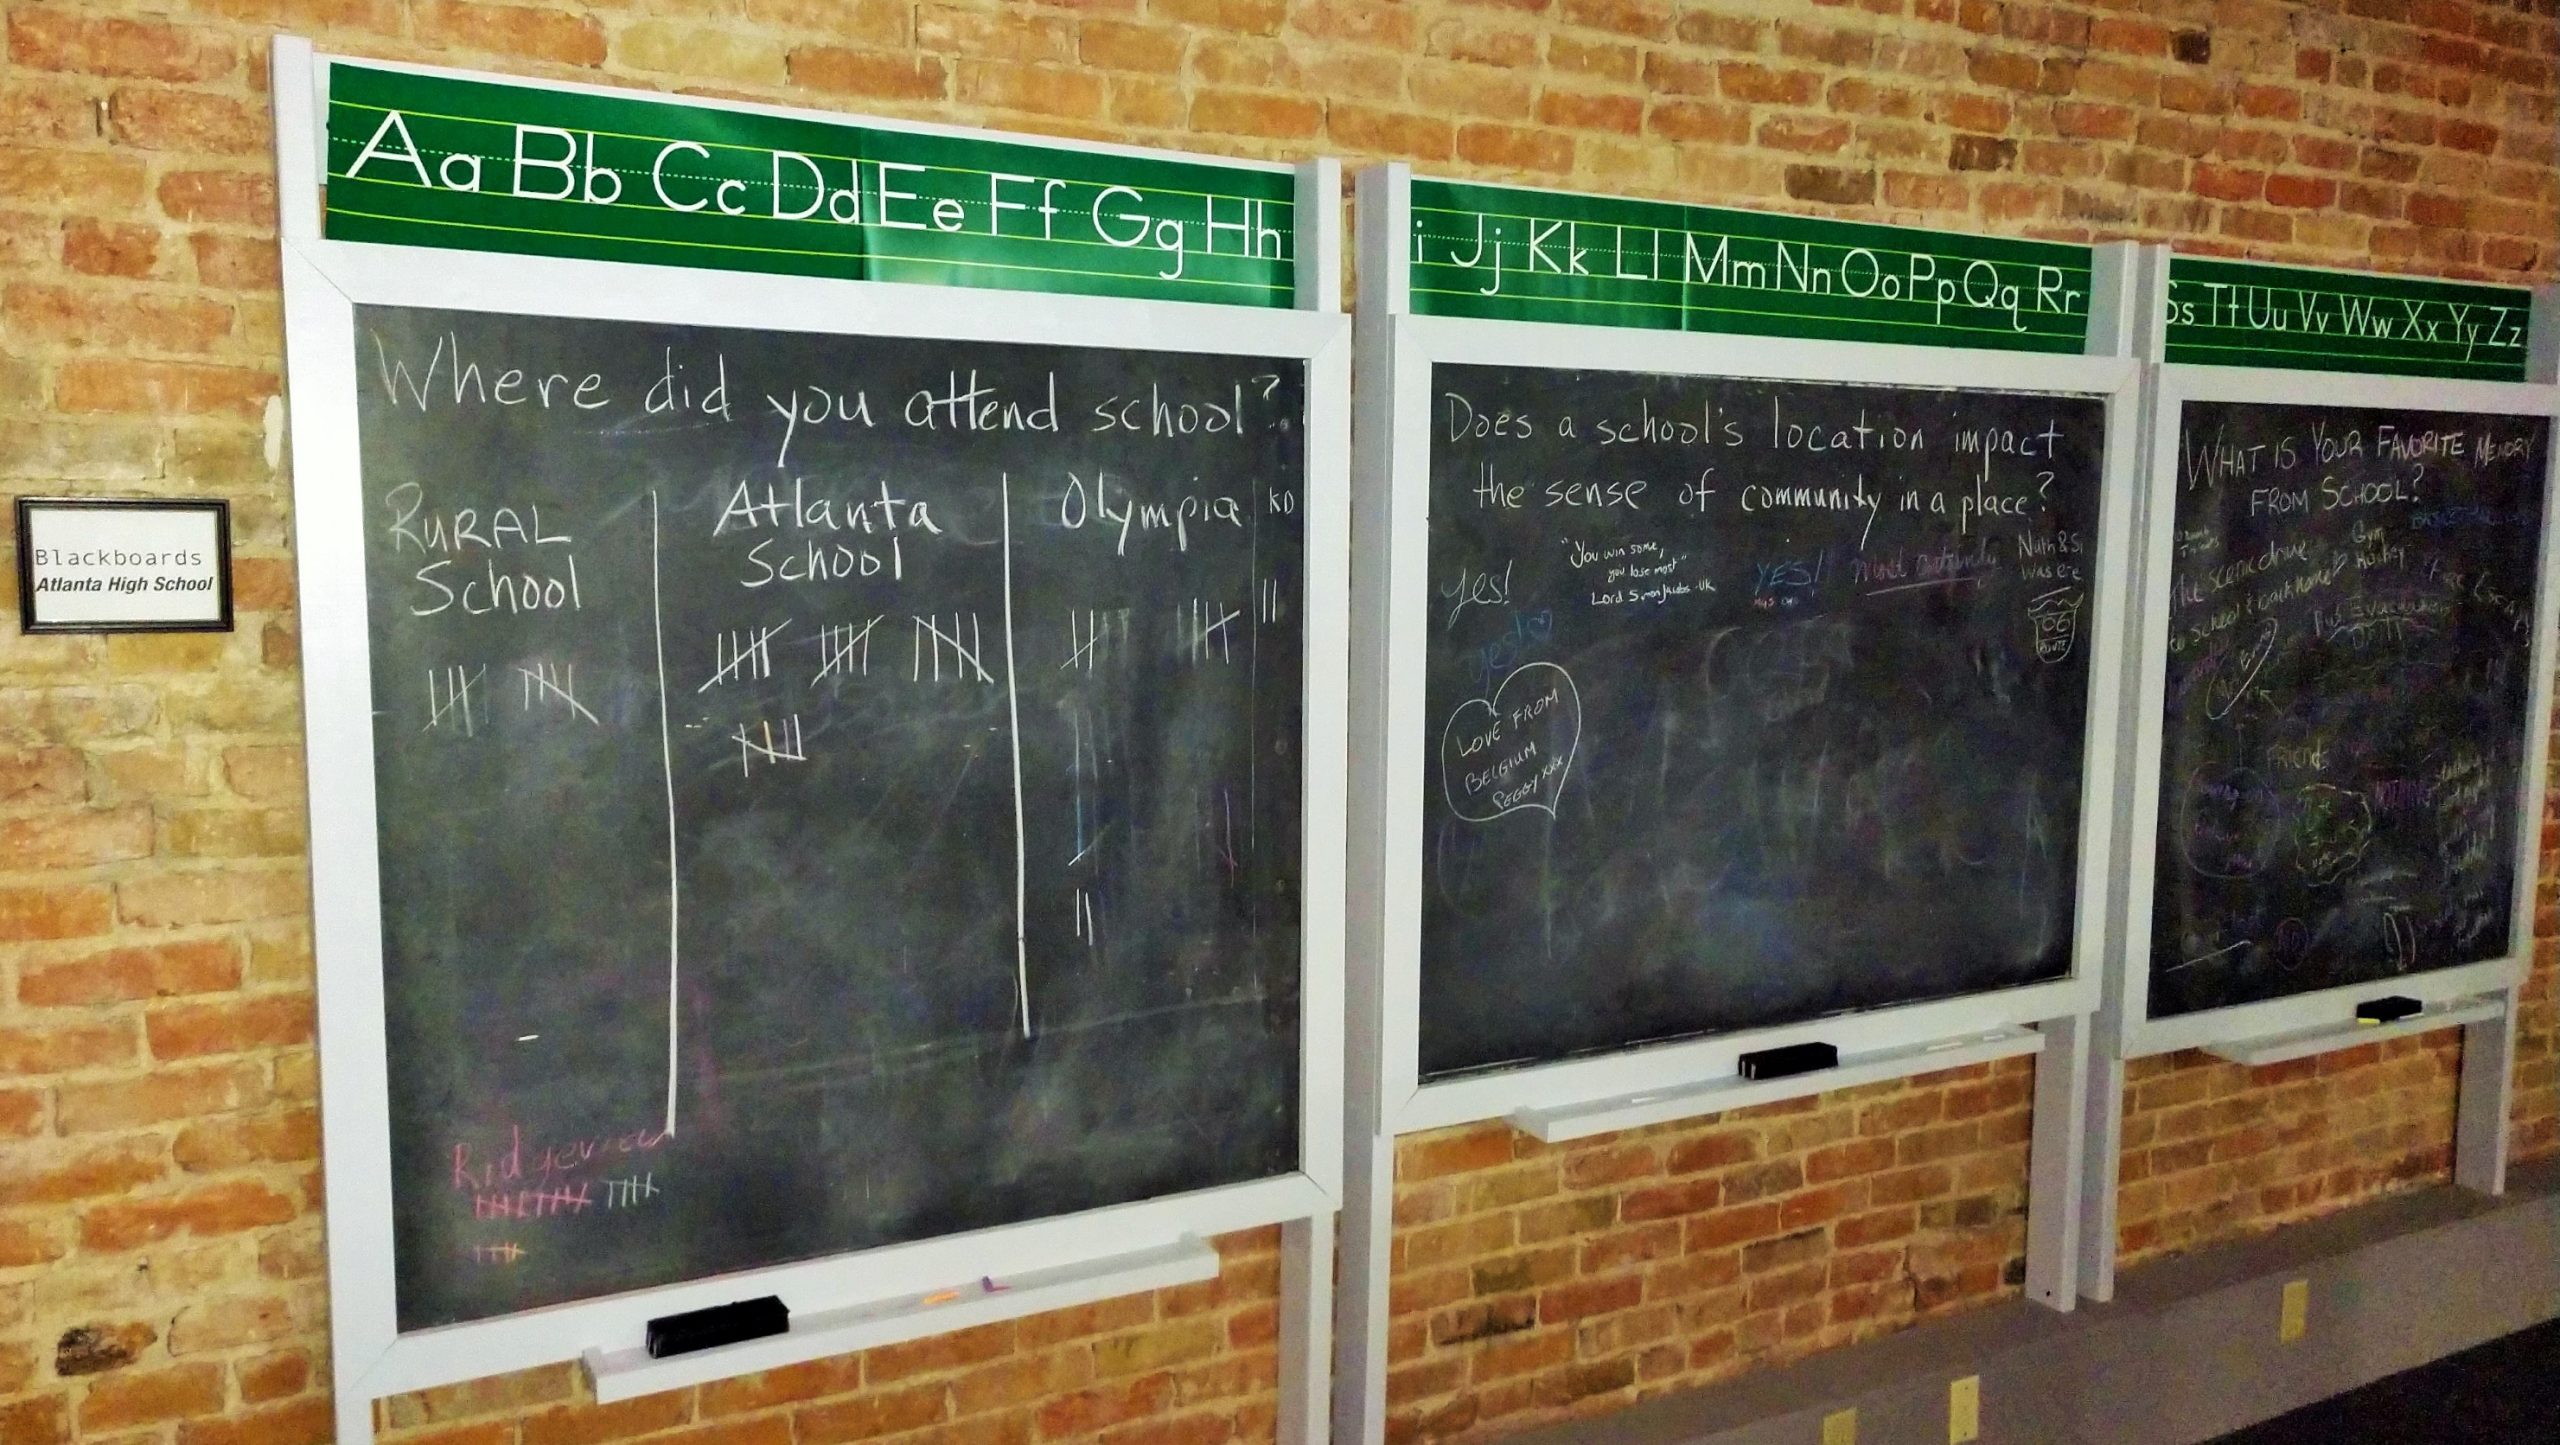 Photograph of chalkboards from Atlanta High School formed an interactive component of "Classrooms & Community".